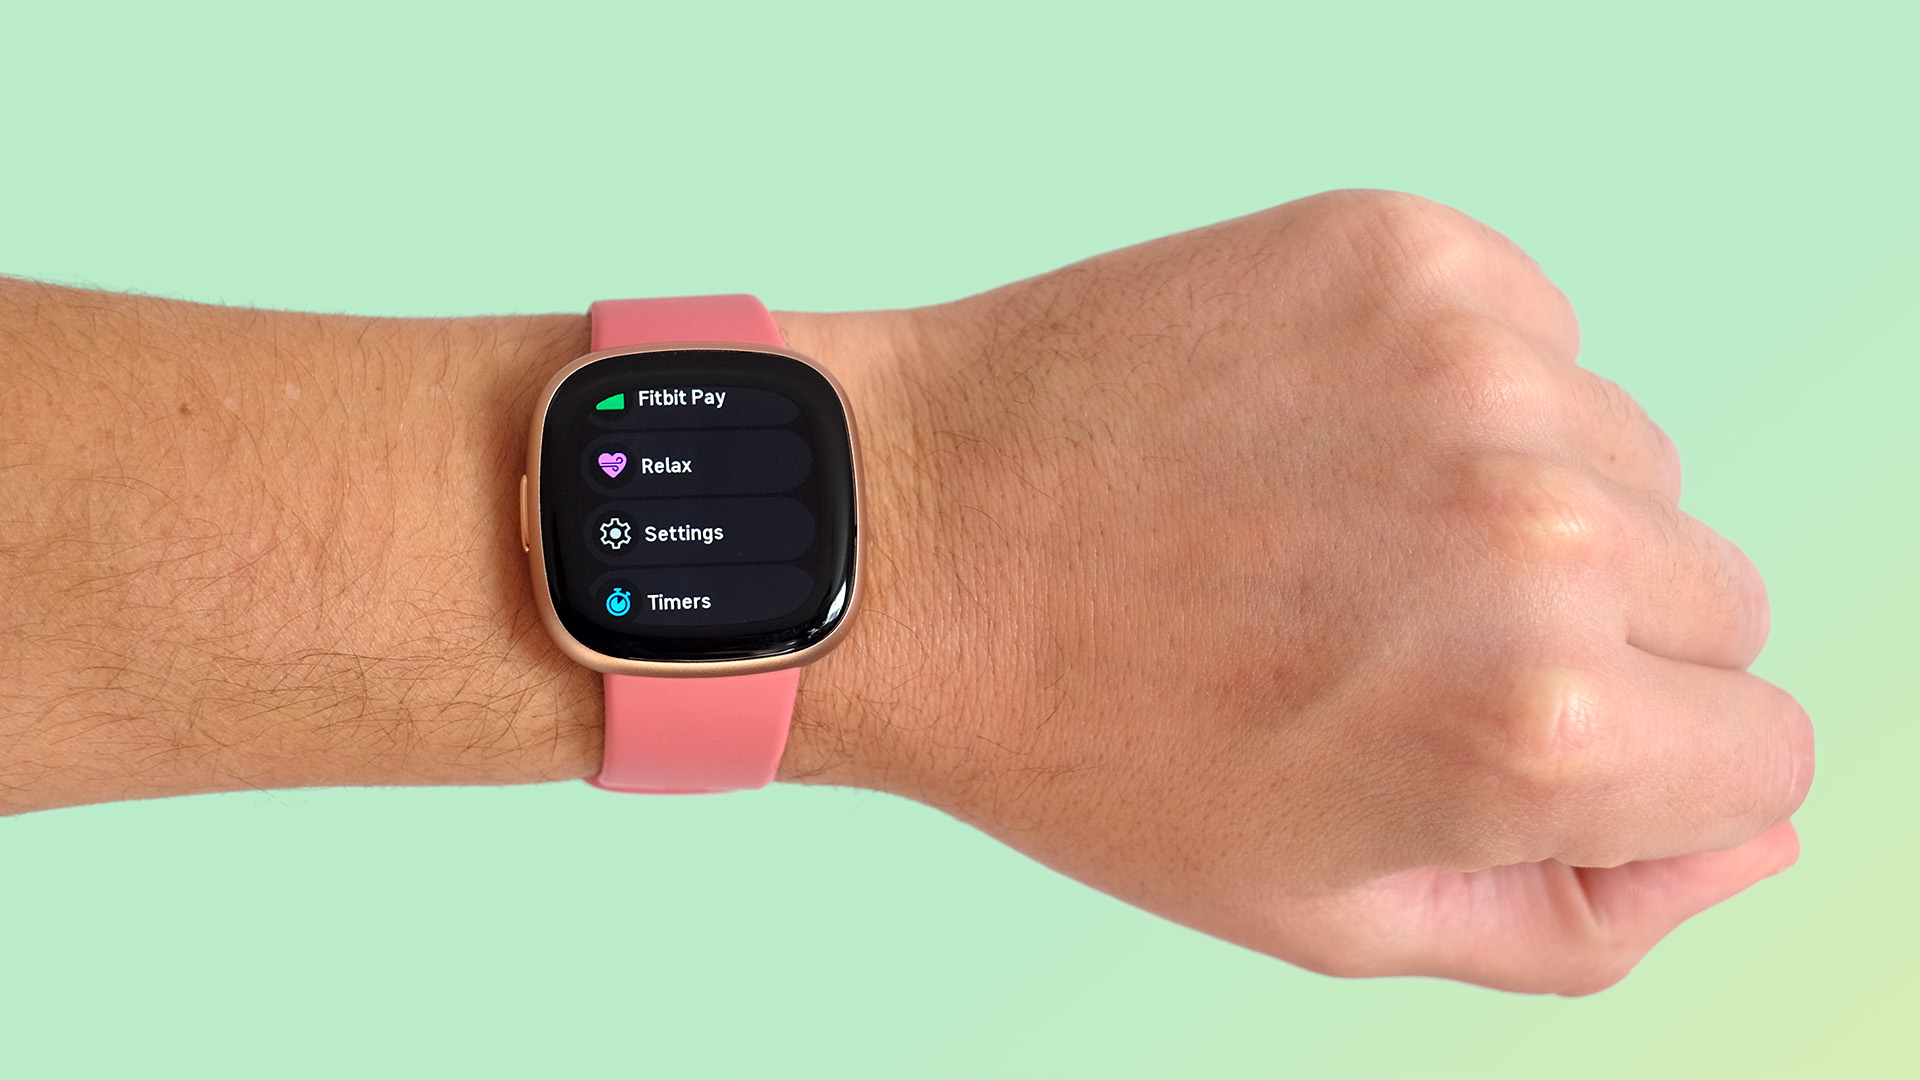 app-acquisition-a-step-by-step-guide-to-downloading-the-fitbit-app